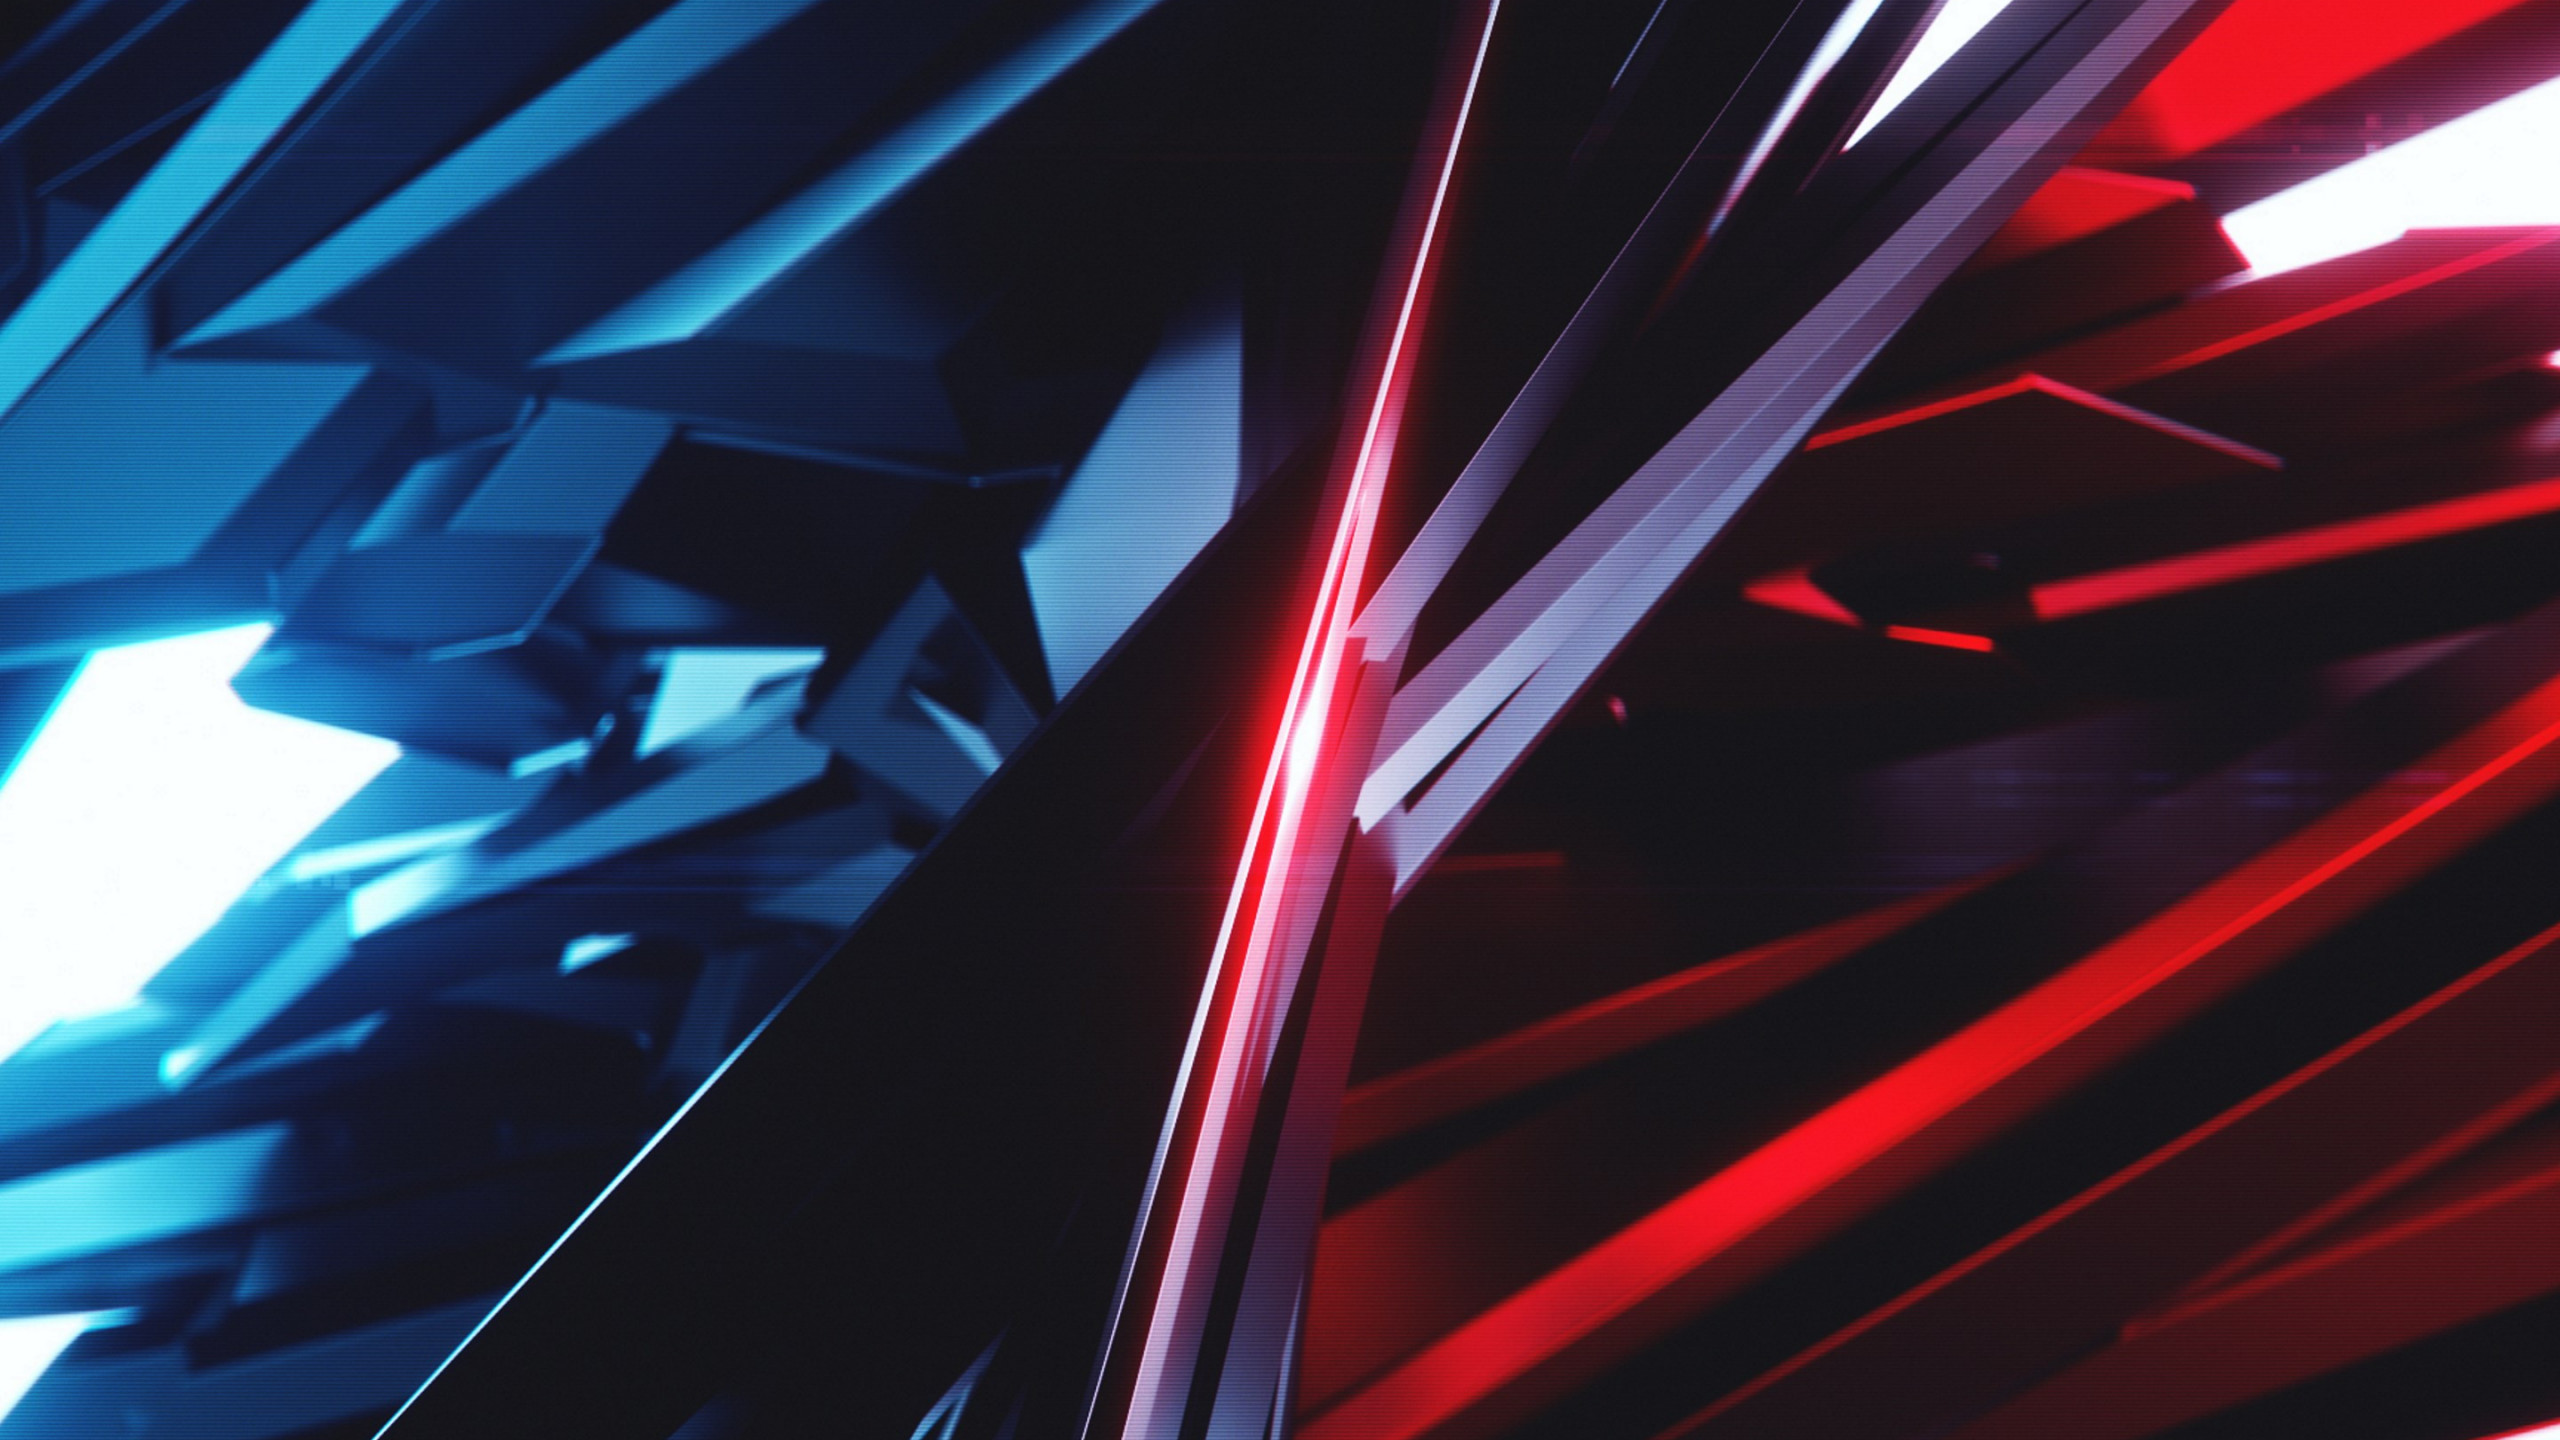 Abstract 3D: Blue vs Red wallpaper 2560x1440